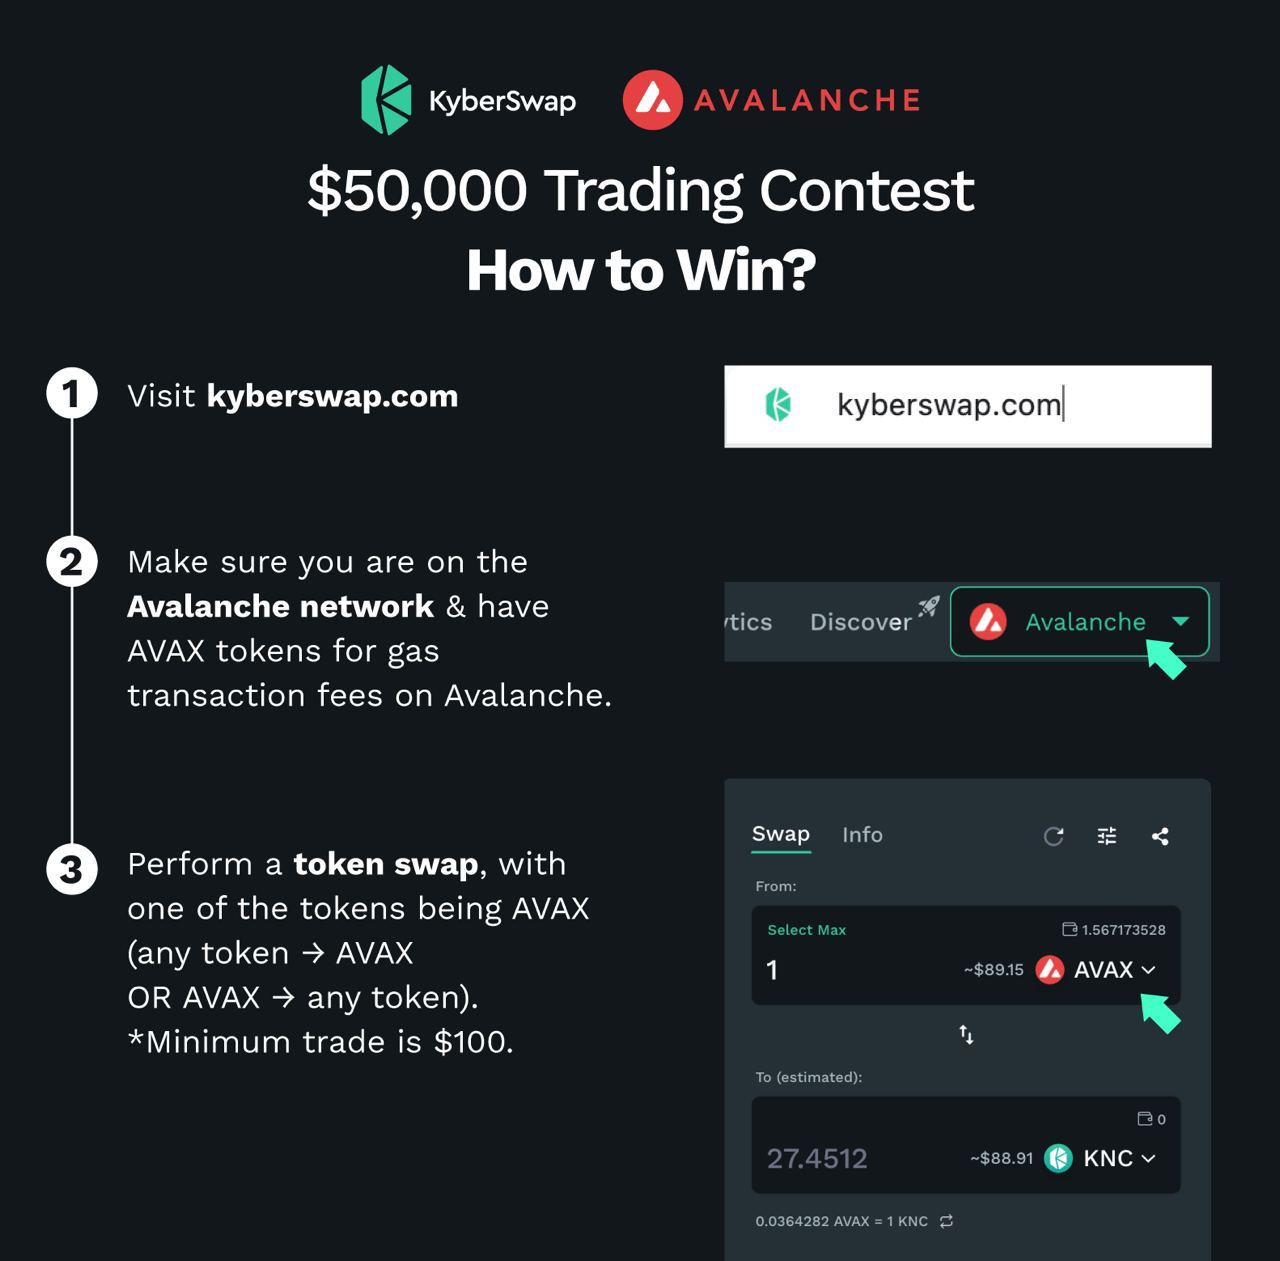 how to win the trading contest